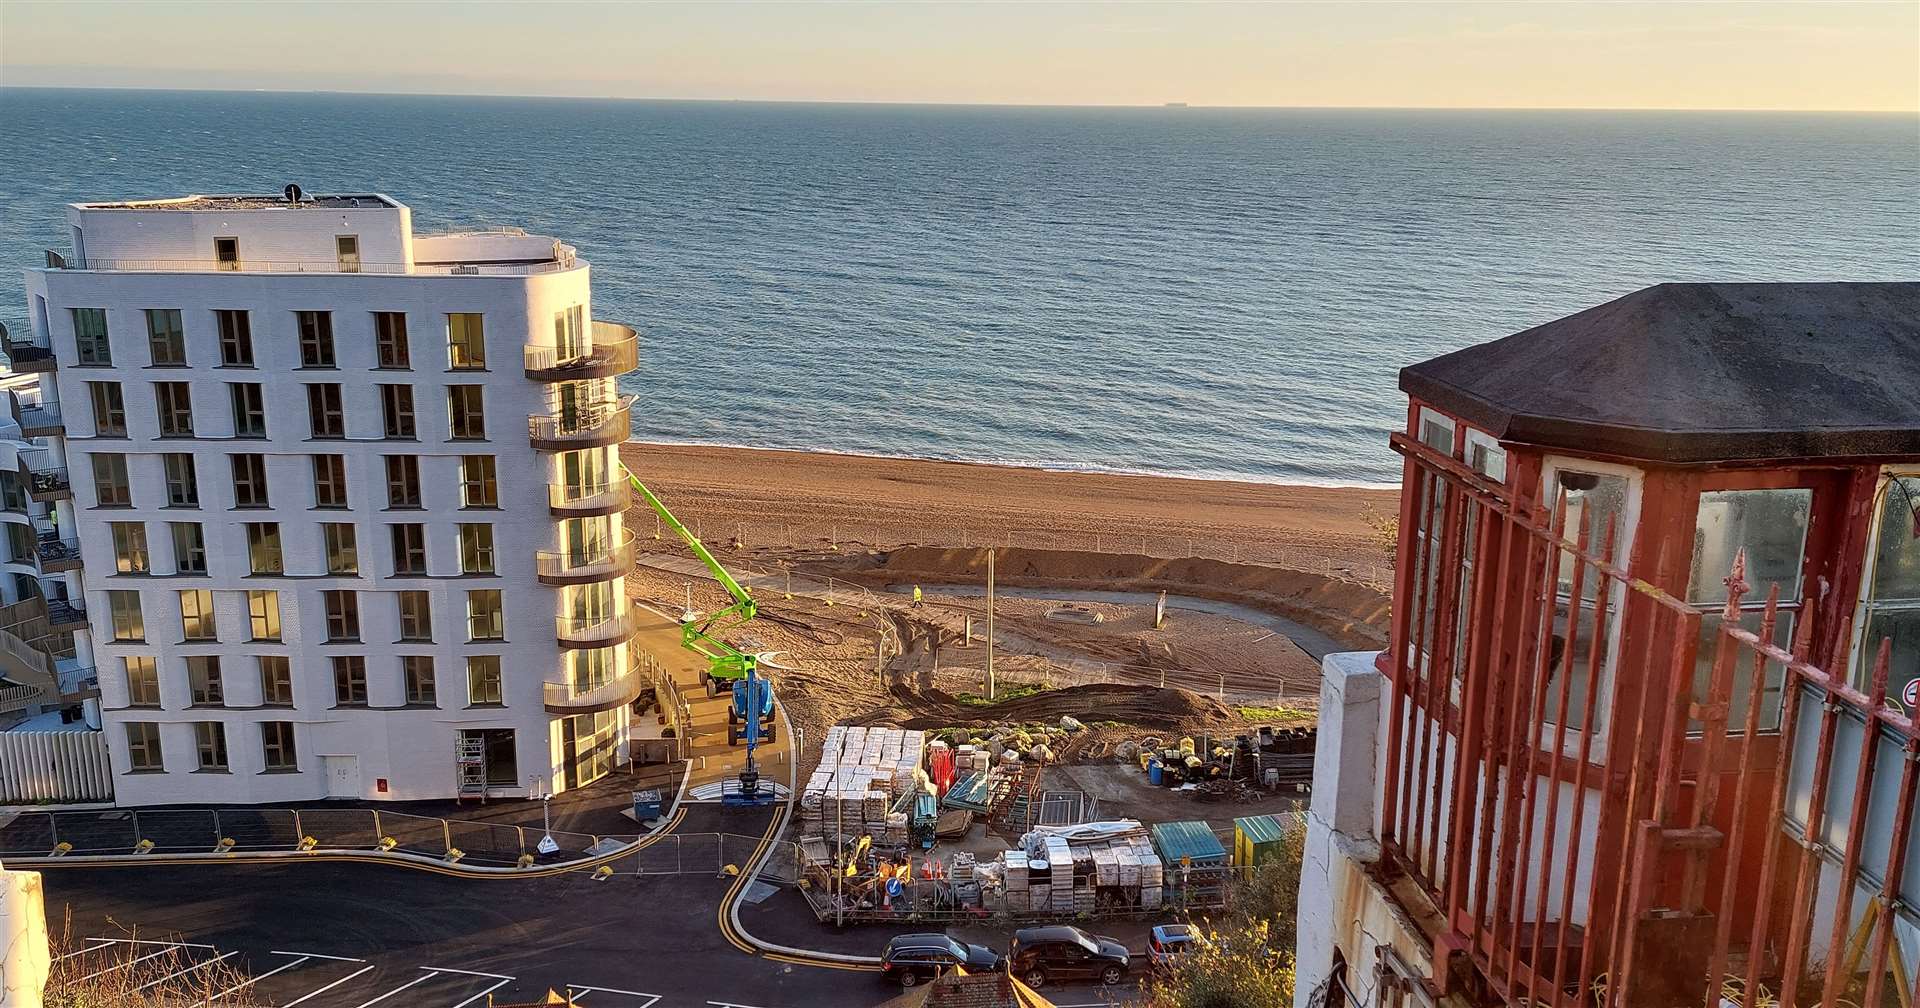 Residents have started to move into the flats on Folkestone beach as work continues on the site